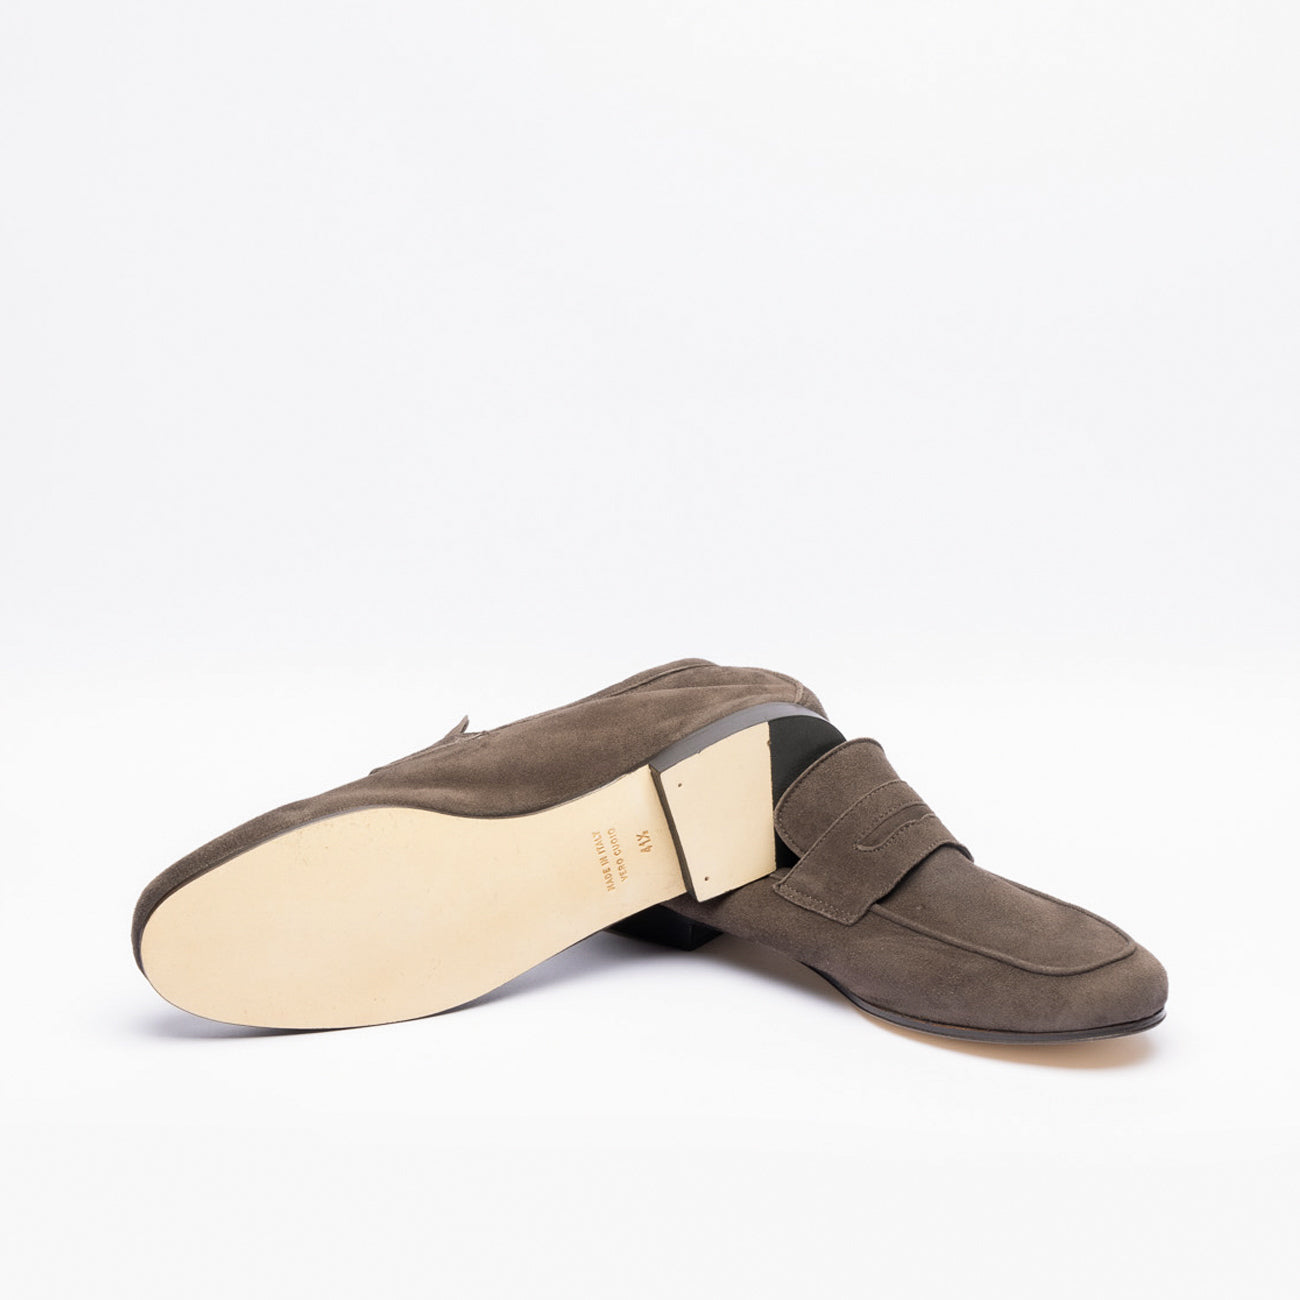 Moccasin penny loafer Borghini Pocket M in brown suede